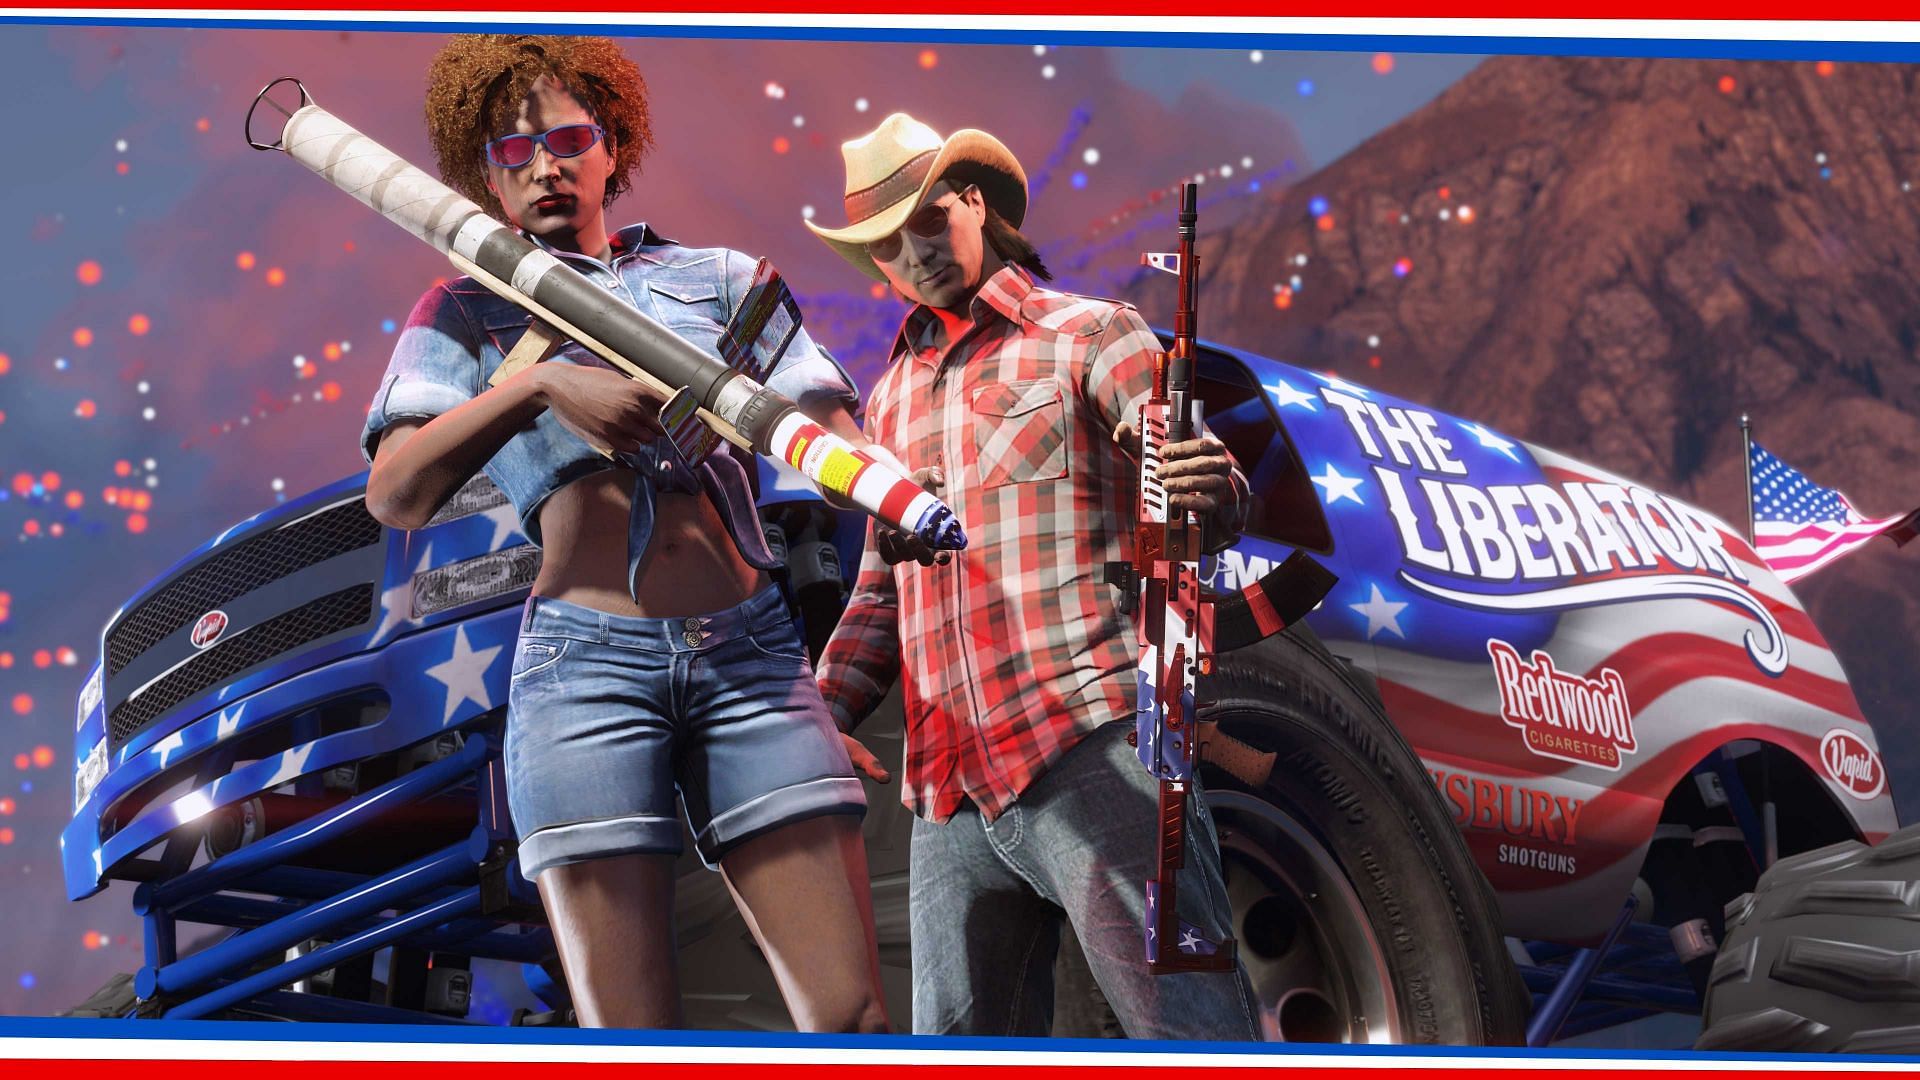 A promotional image related to this vehicle and Independence Day (Image via Rockstar Games)